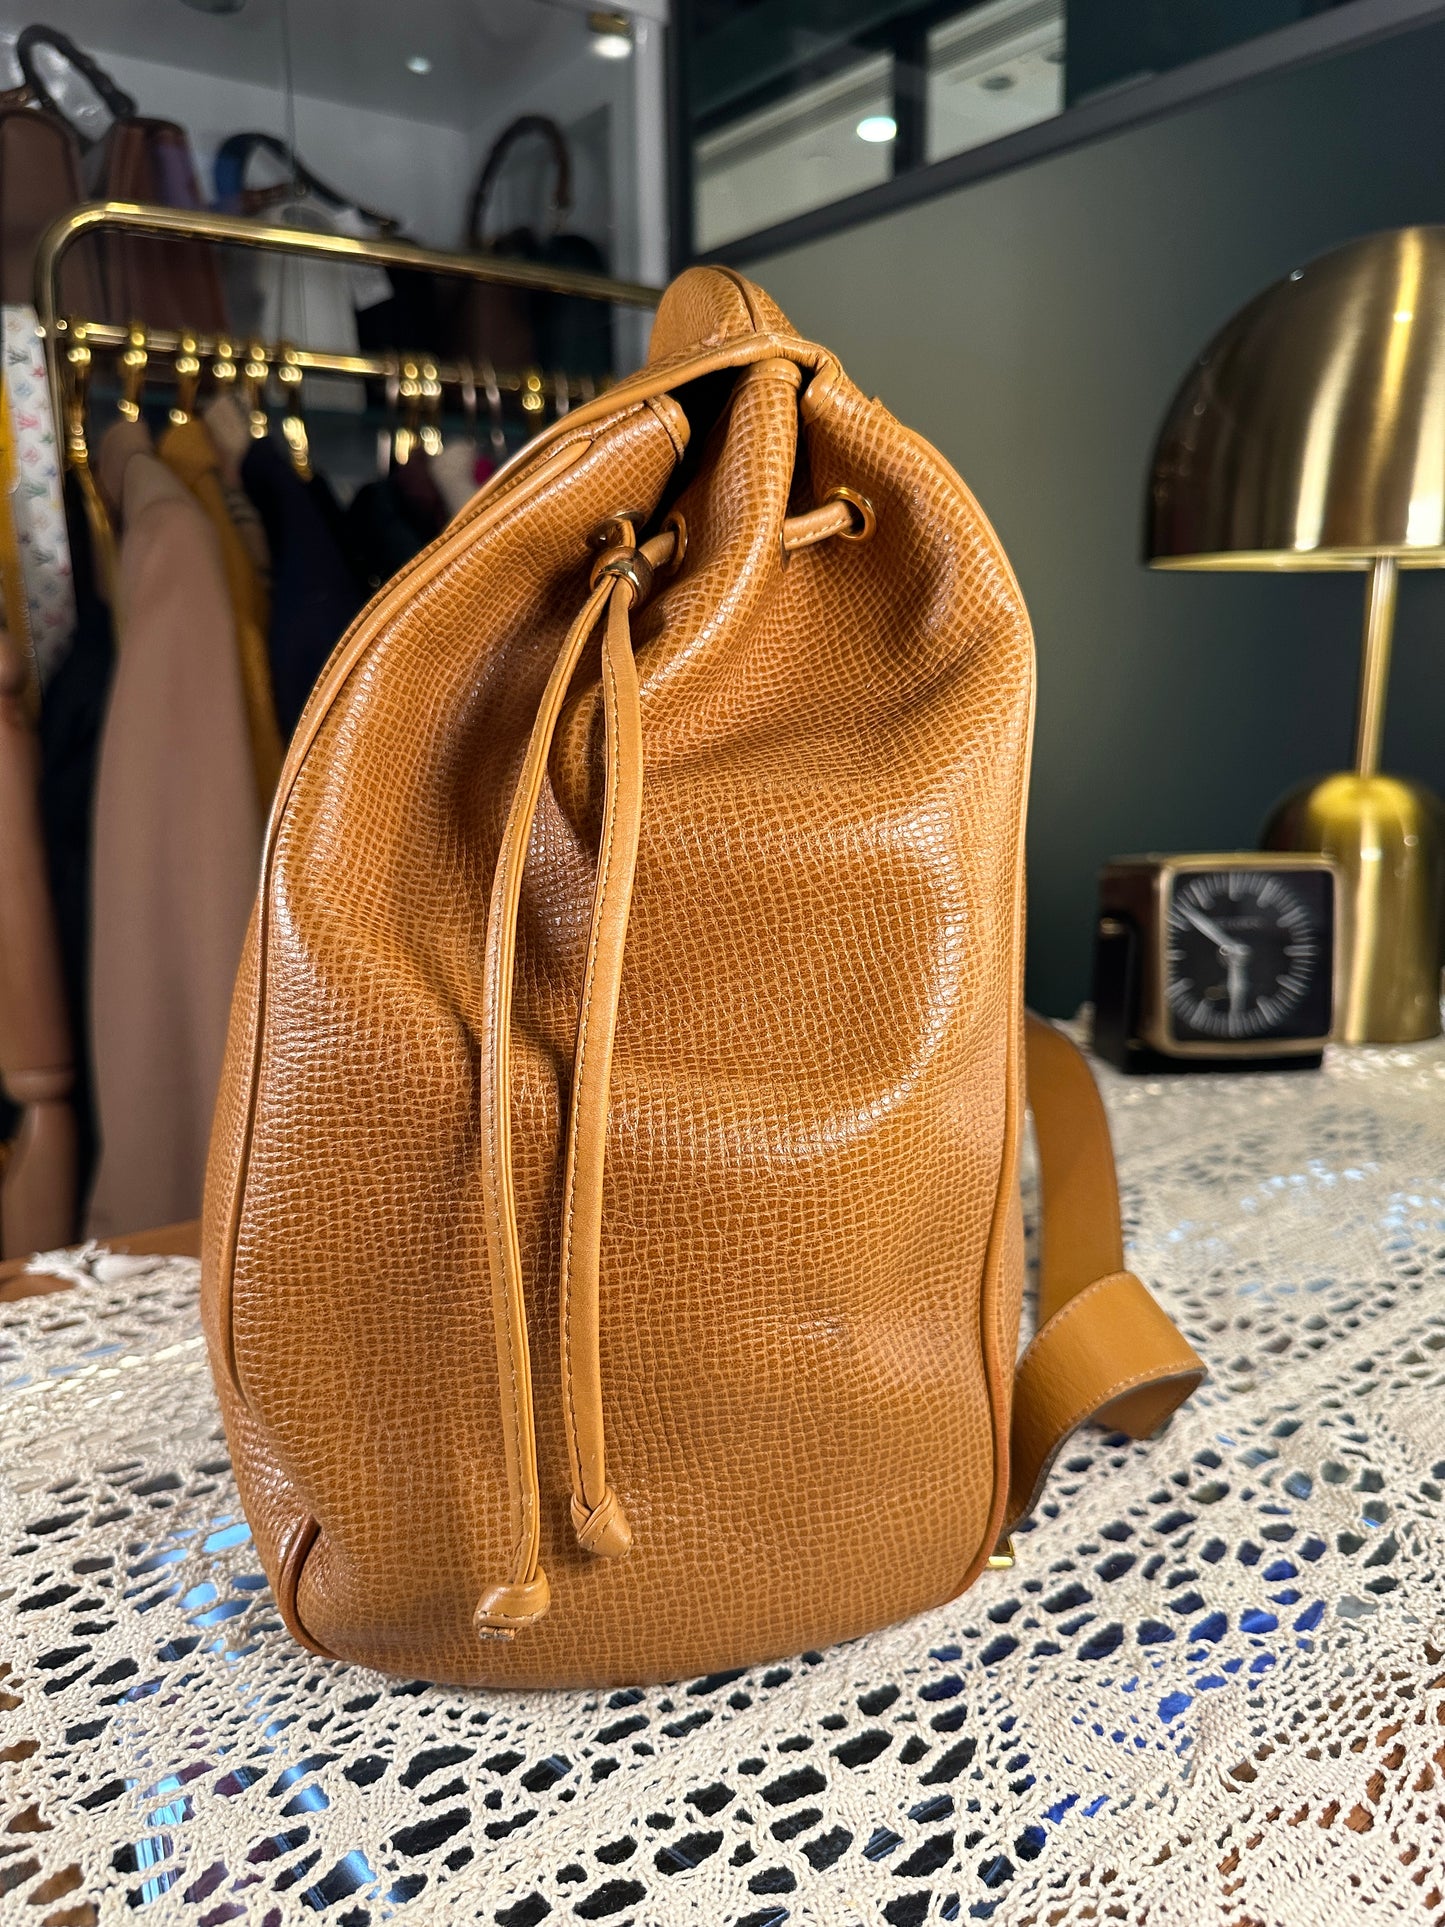 CHRISTIAN DIOR VINTAGE 100% Authentic Genuine Leather Drawstring Backpack, Yellow, 2000's, Great Condition, Rare